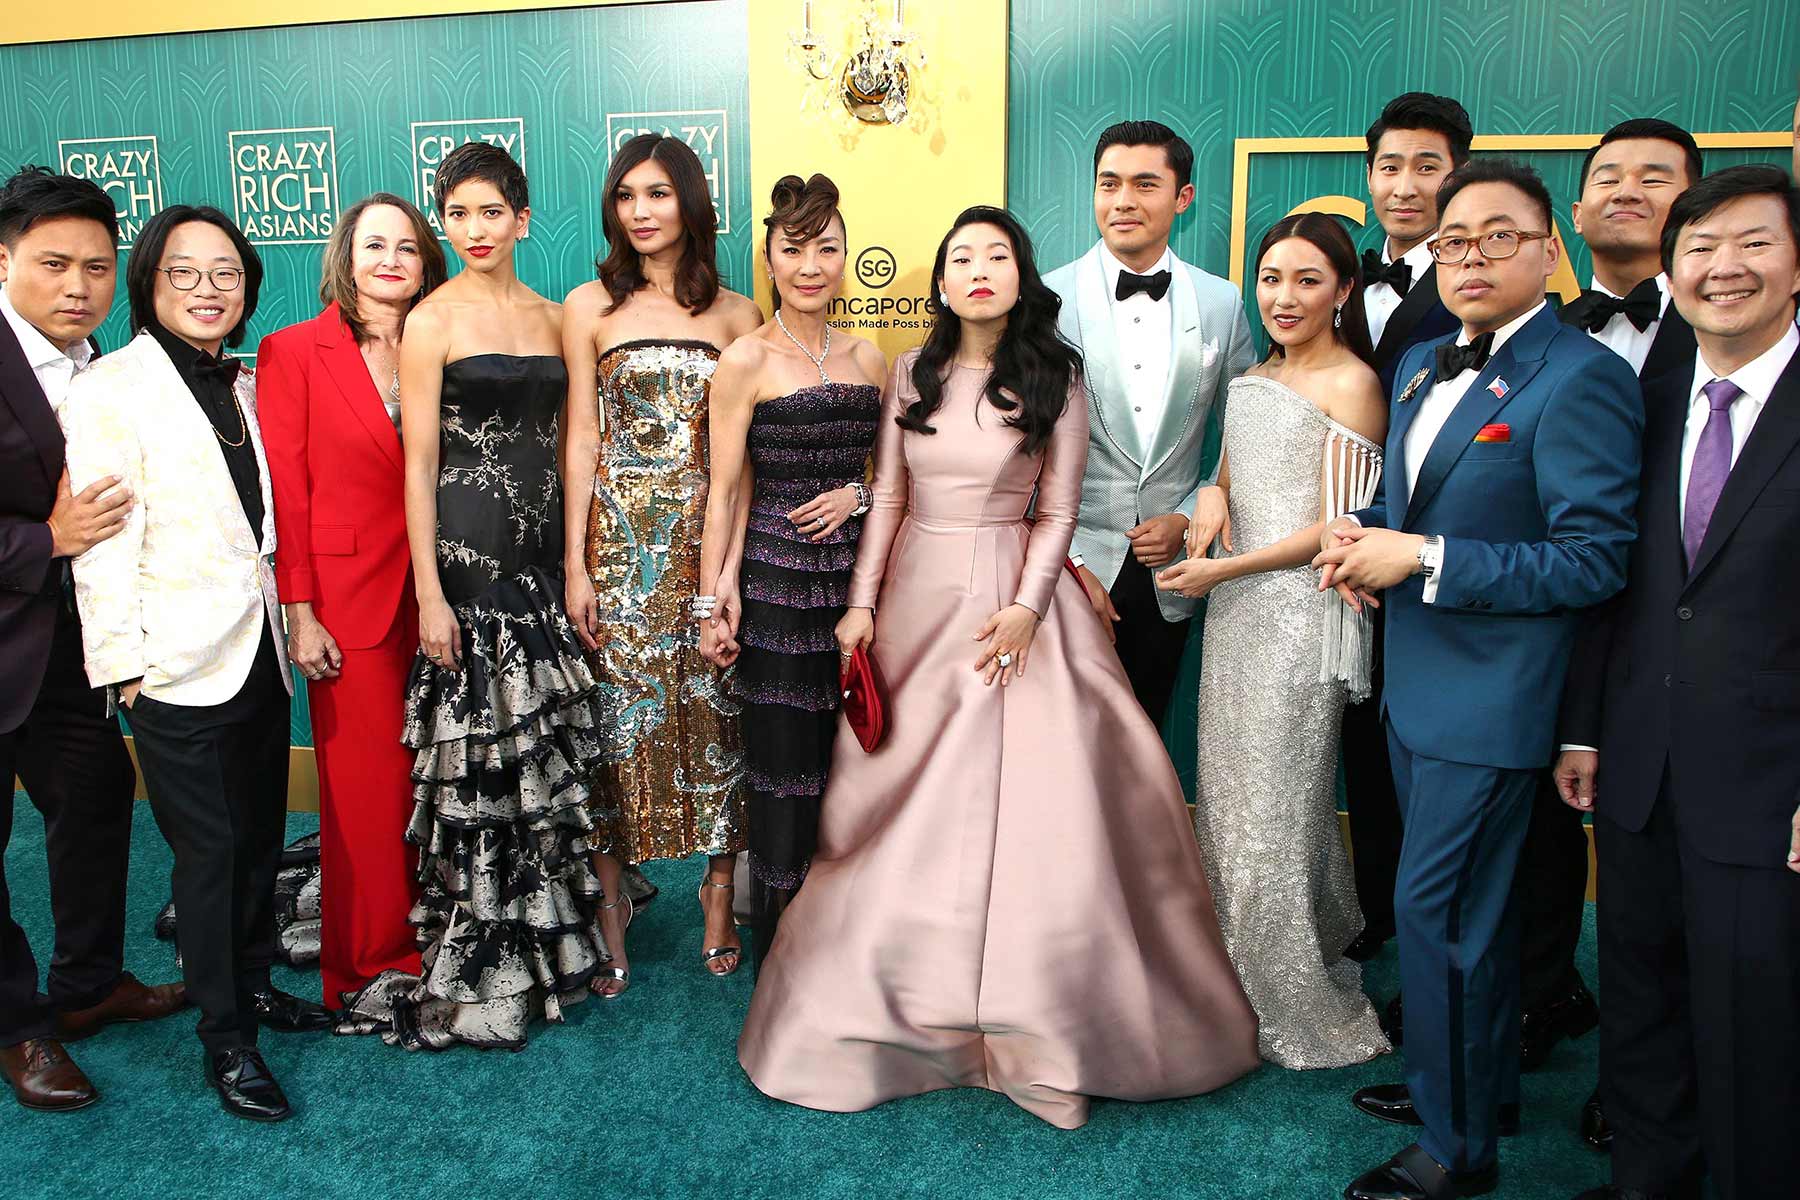 All The Glitz And All The Glamour From The Crazy Rich Asians Premiere